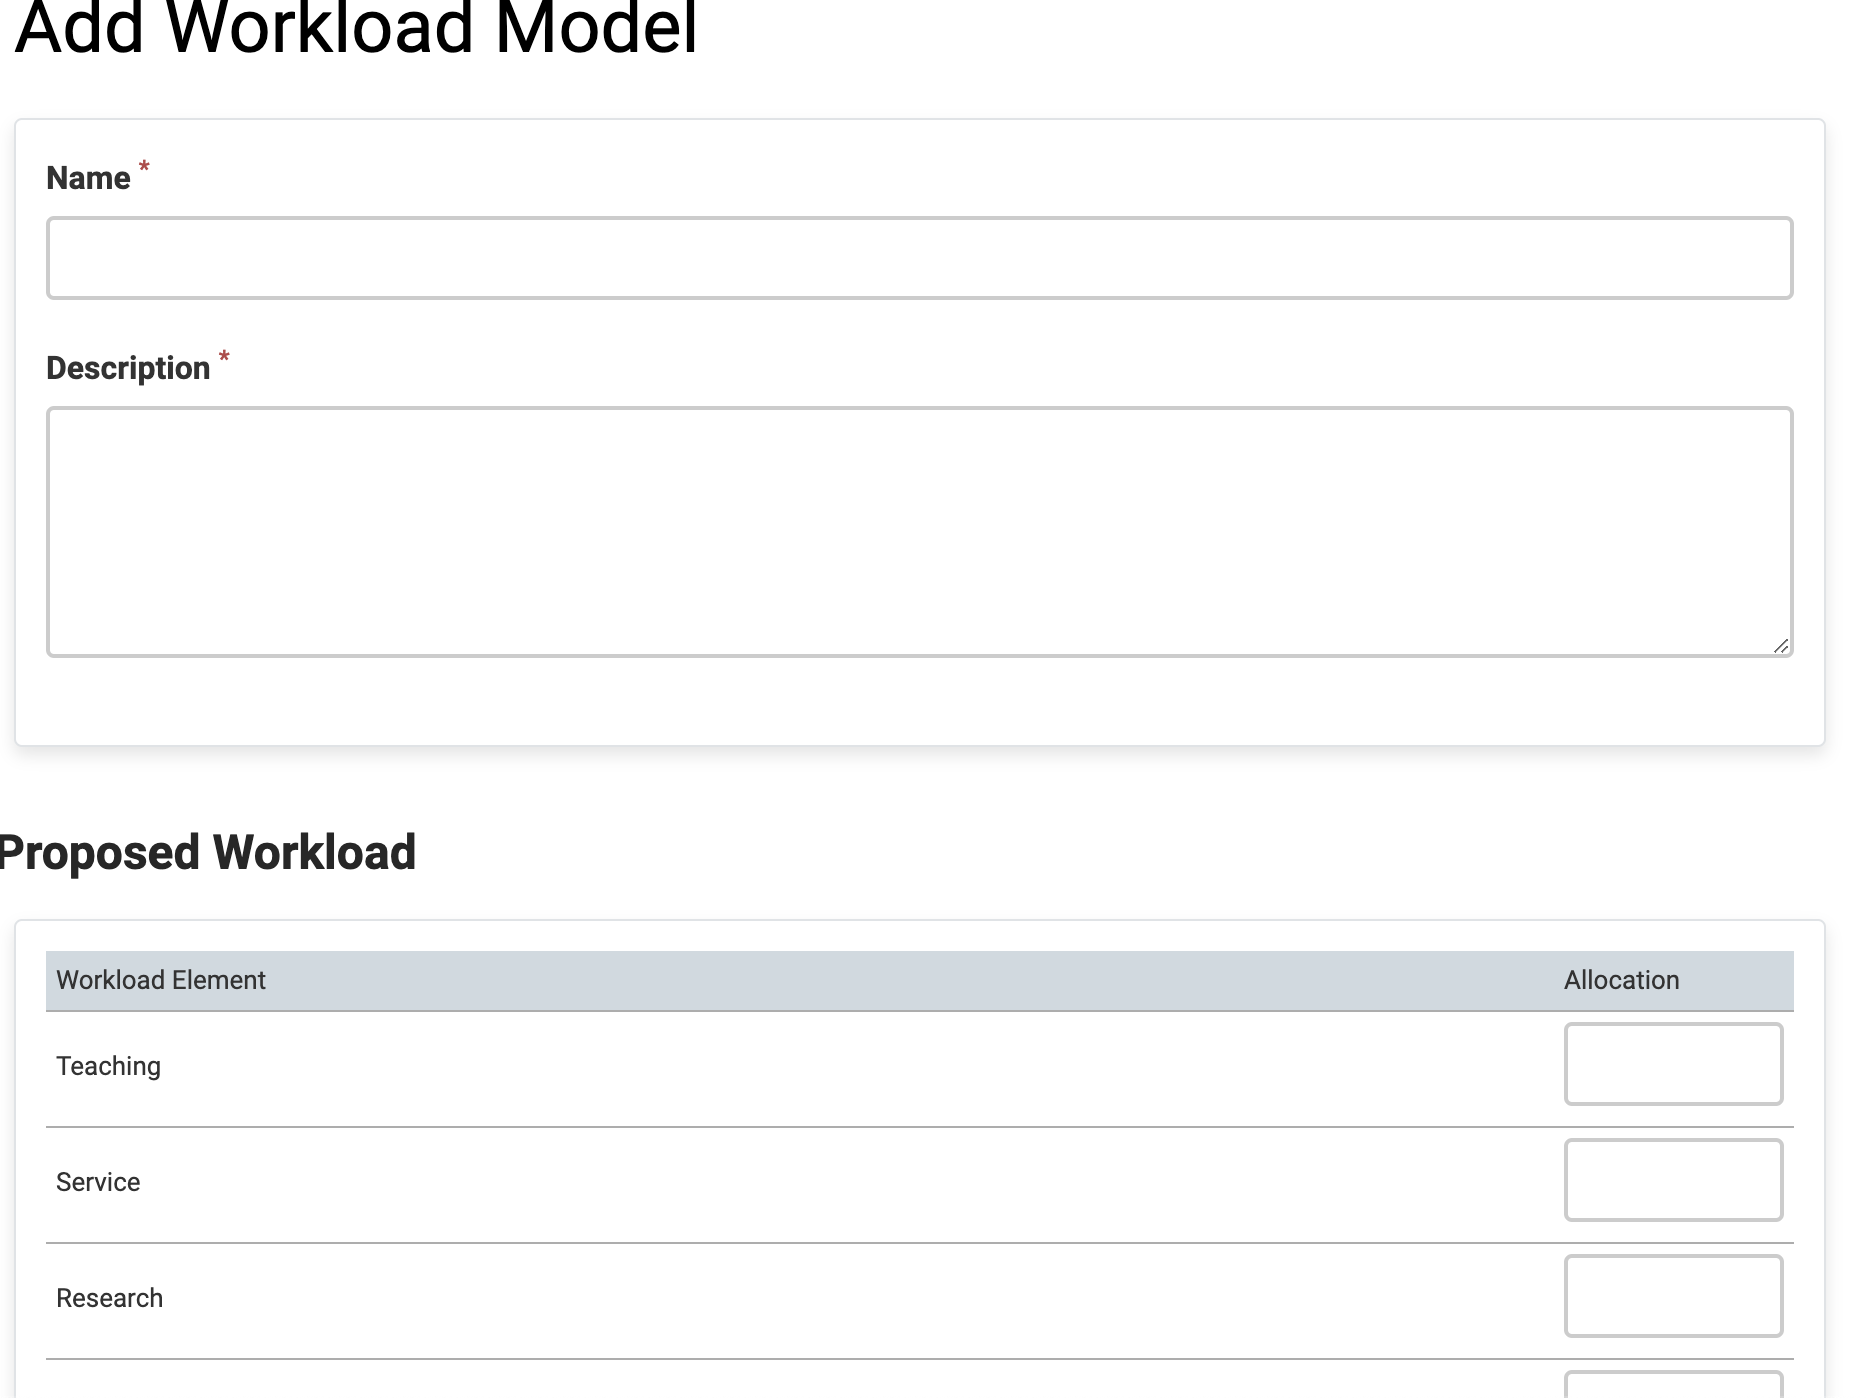 Add Workload Model section at the top with Name and Description fields below. Proposed Workload section at the bottom with Workload Element column on the left and the Allocation column on the right